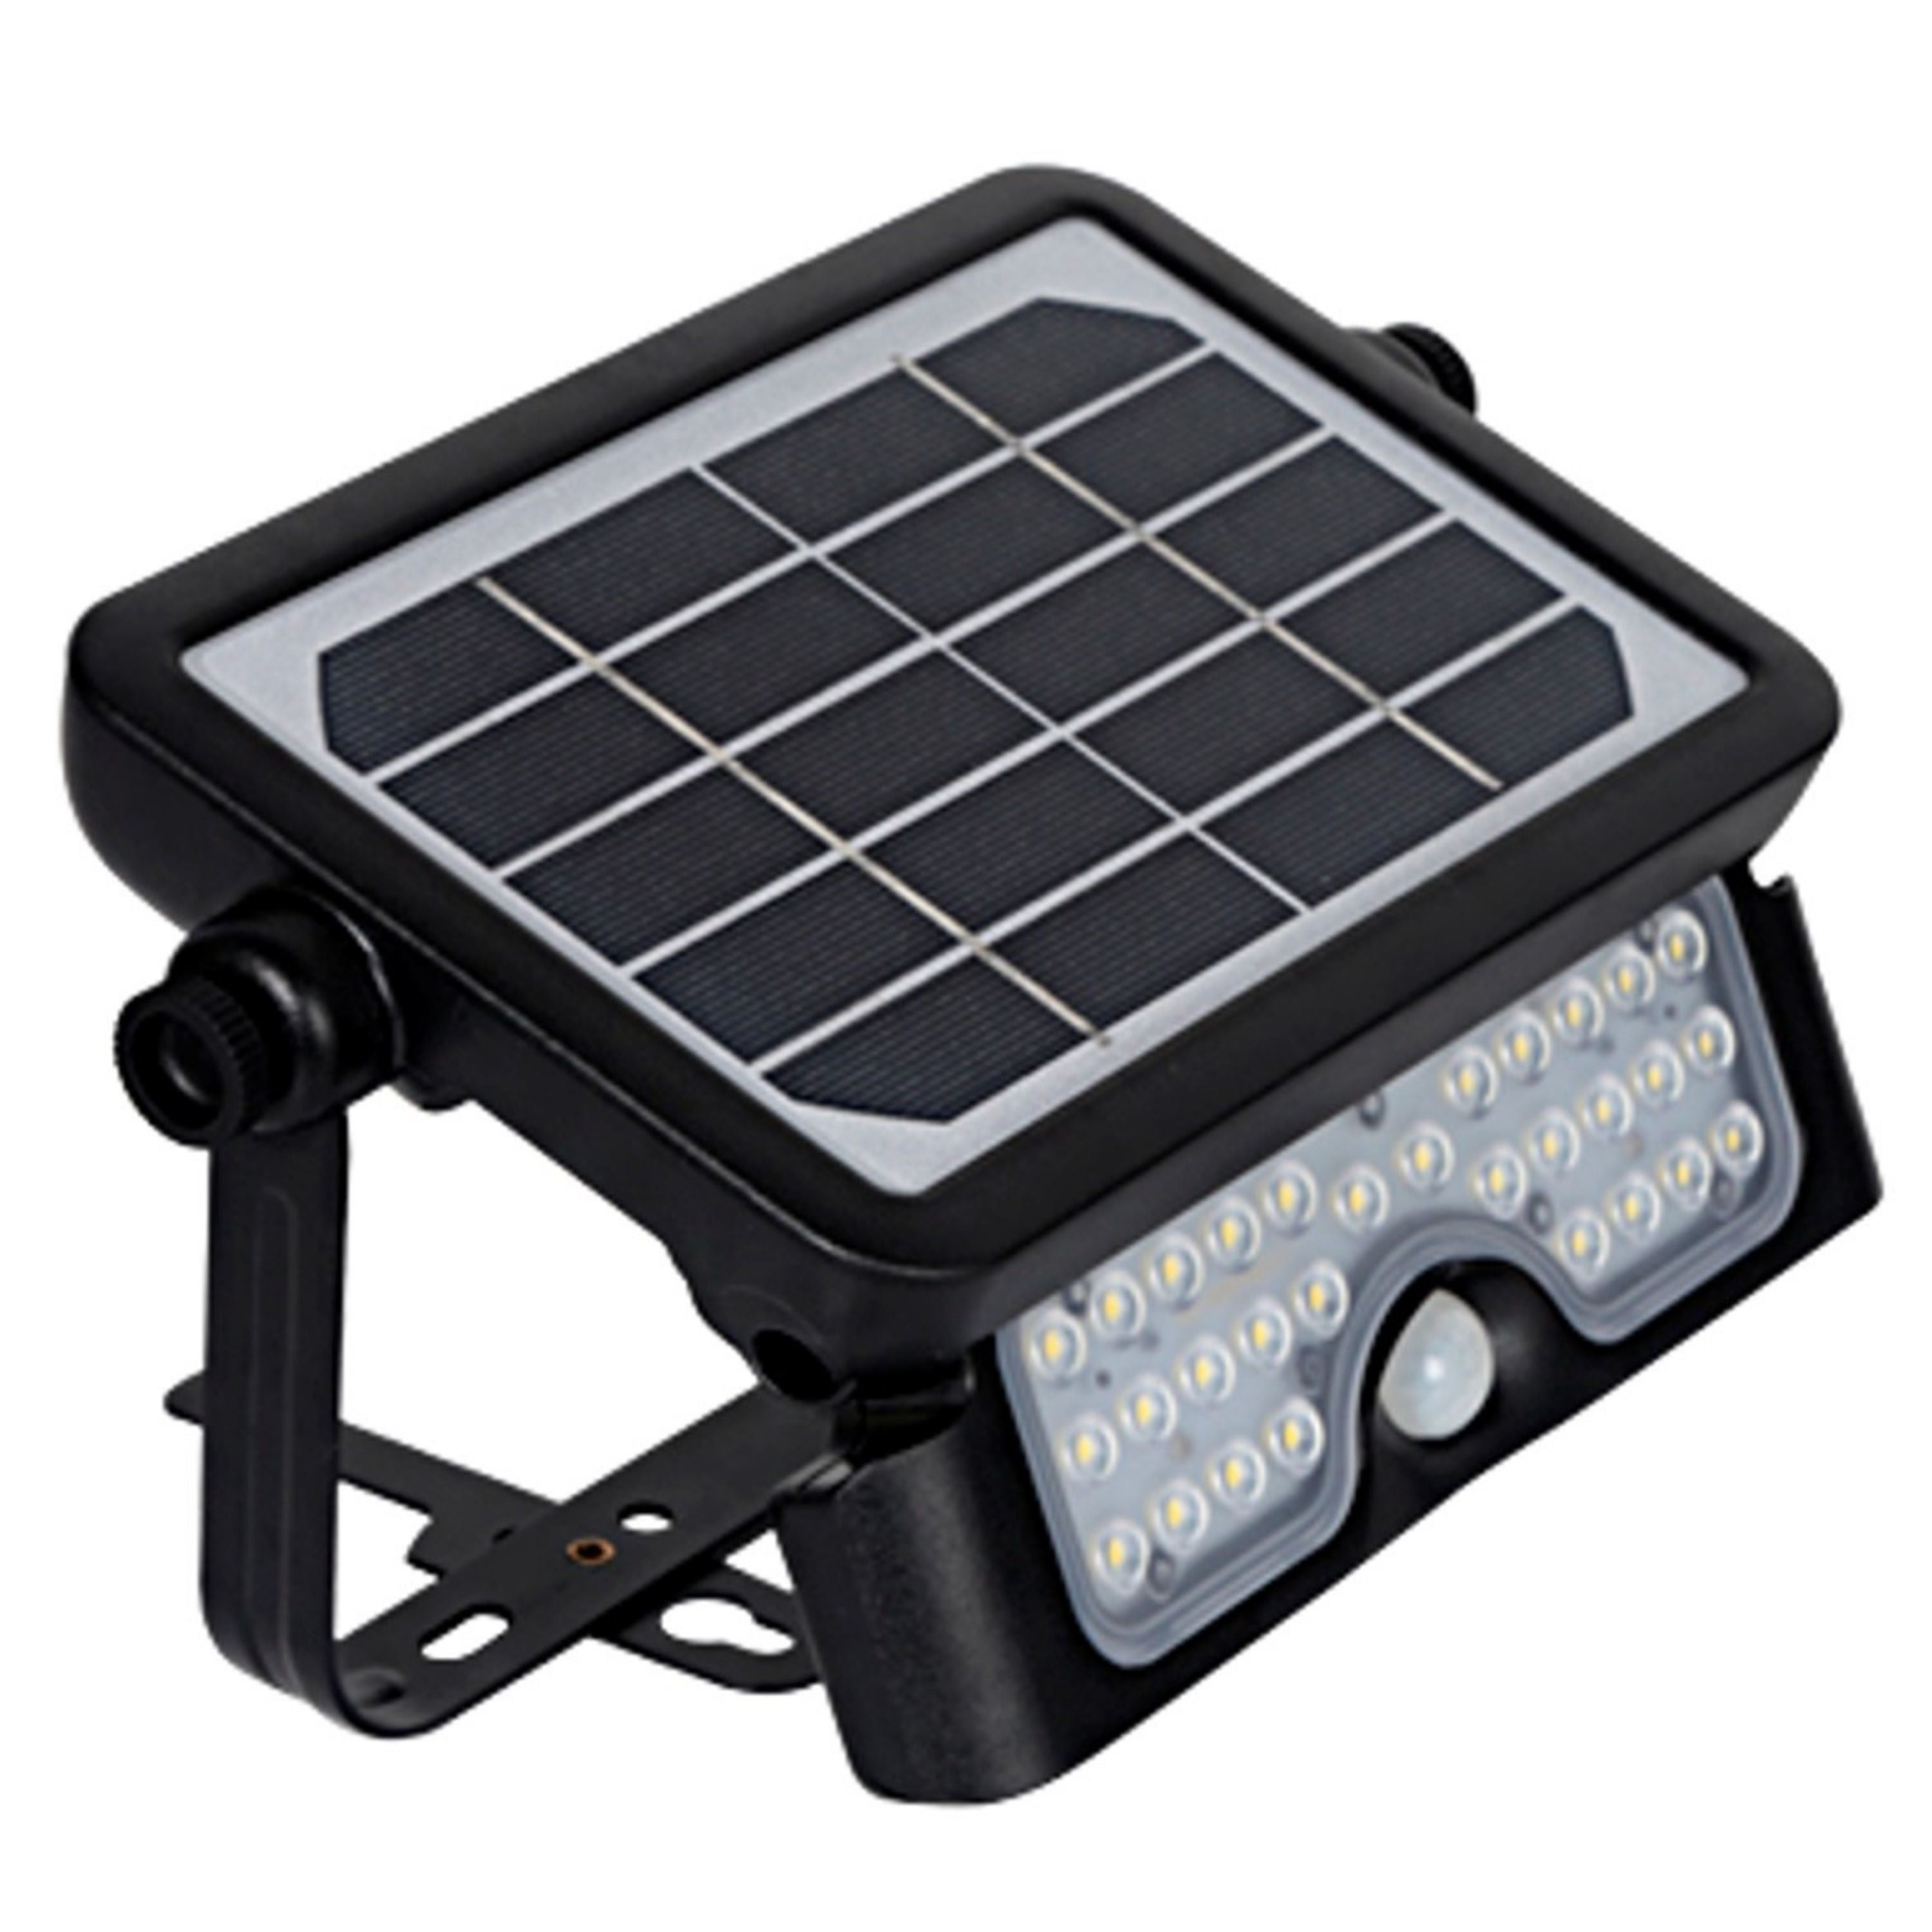 Solar night watch with movement detector